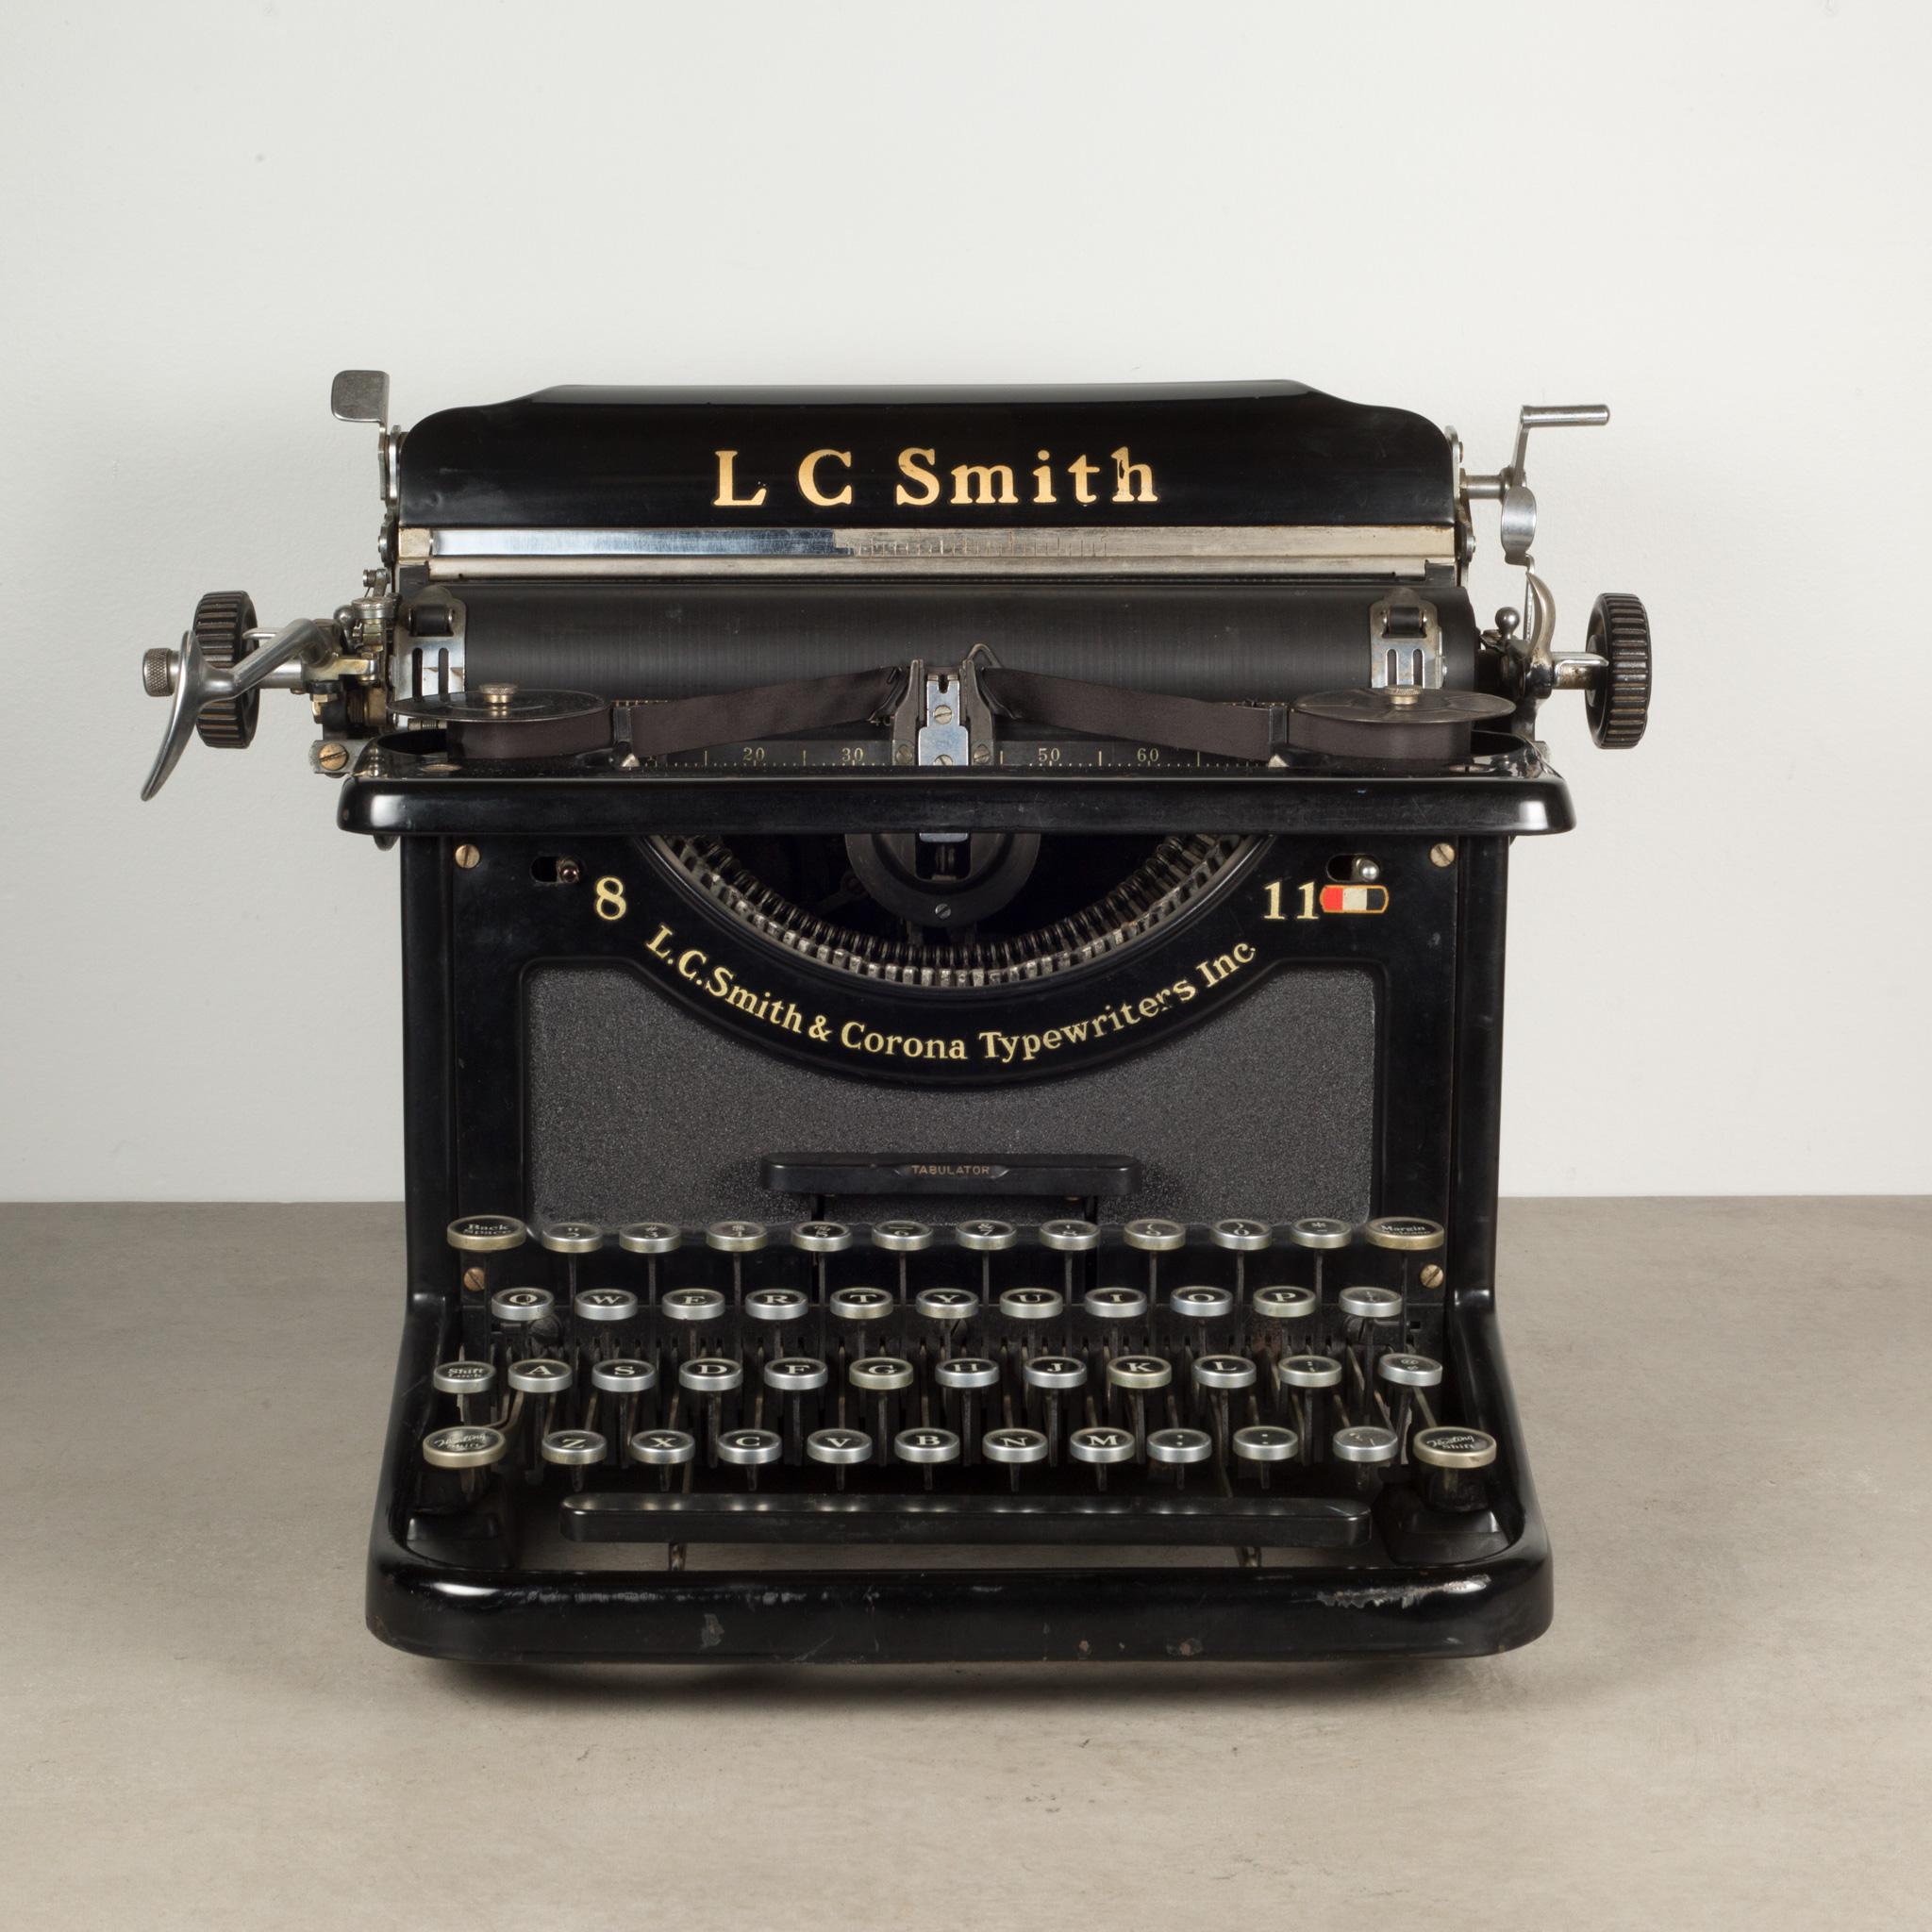 ABOUT

A fully refurbished LC Smith & Corona typewriter in gloss black and original gold lettering. The keys are nickle with black interior and white letters. This typewriter has been refurbished and has smooth typing and functions very well. The